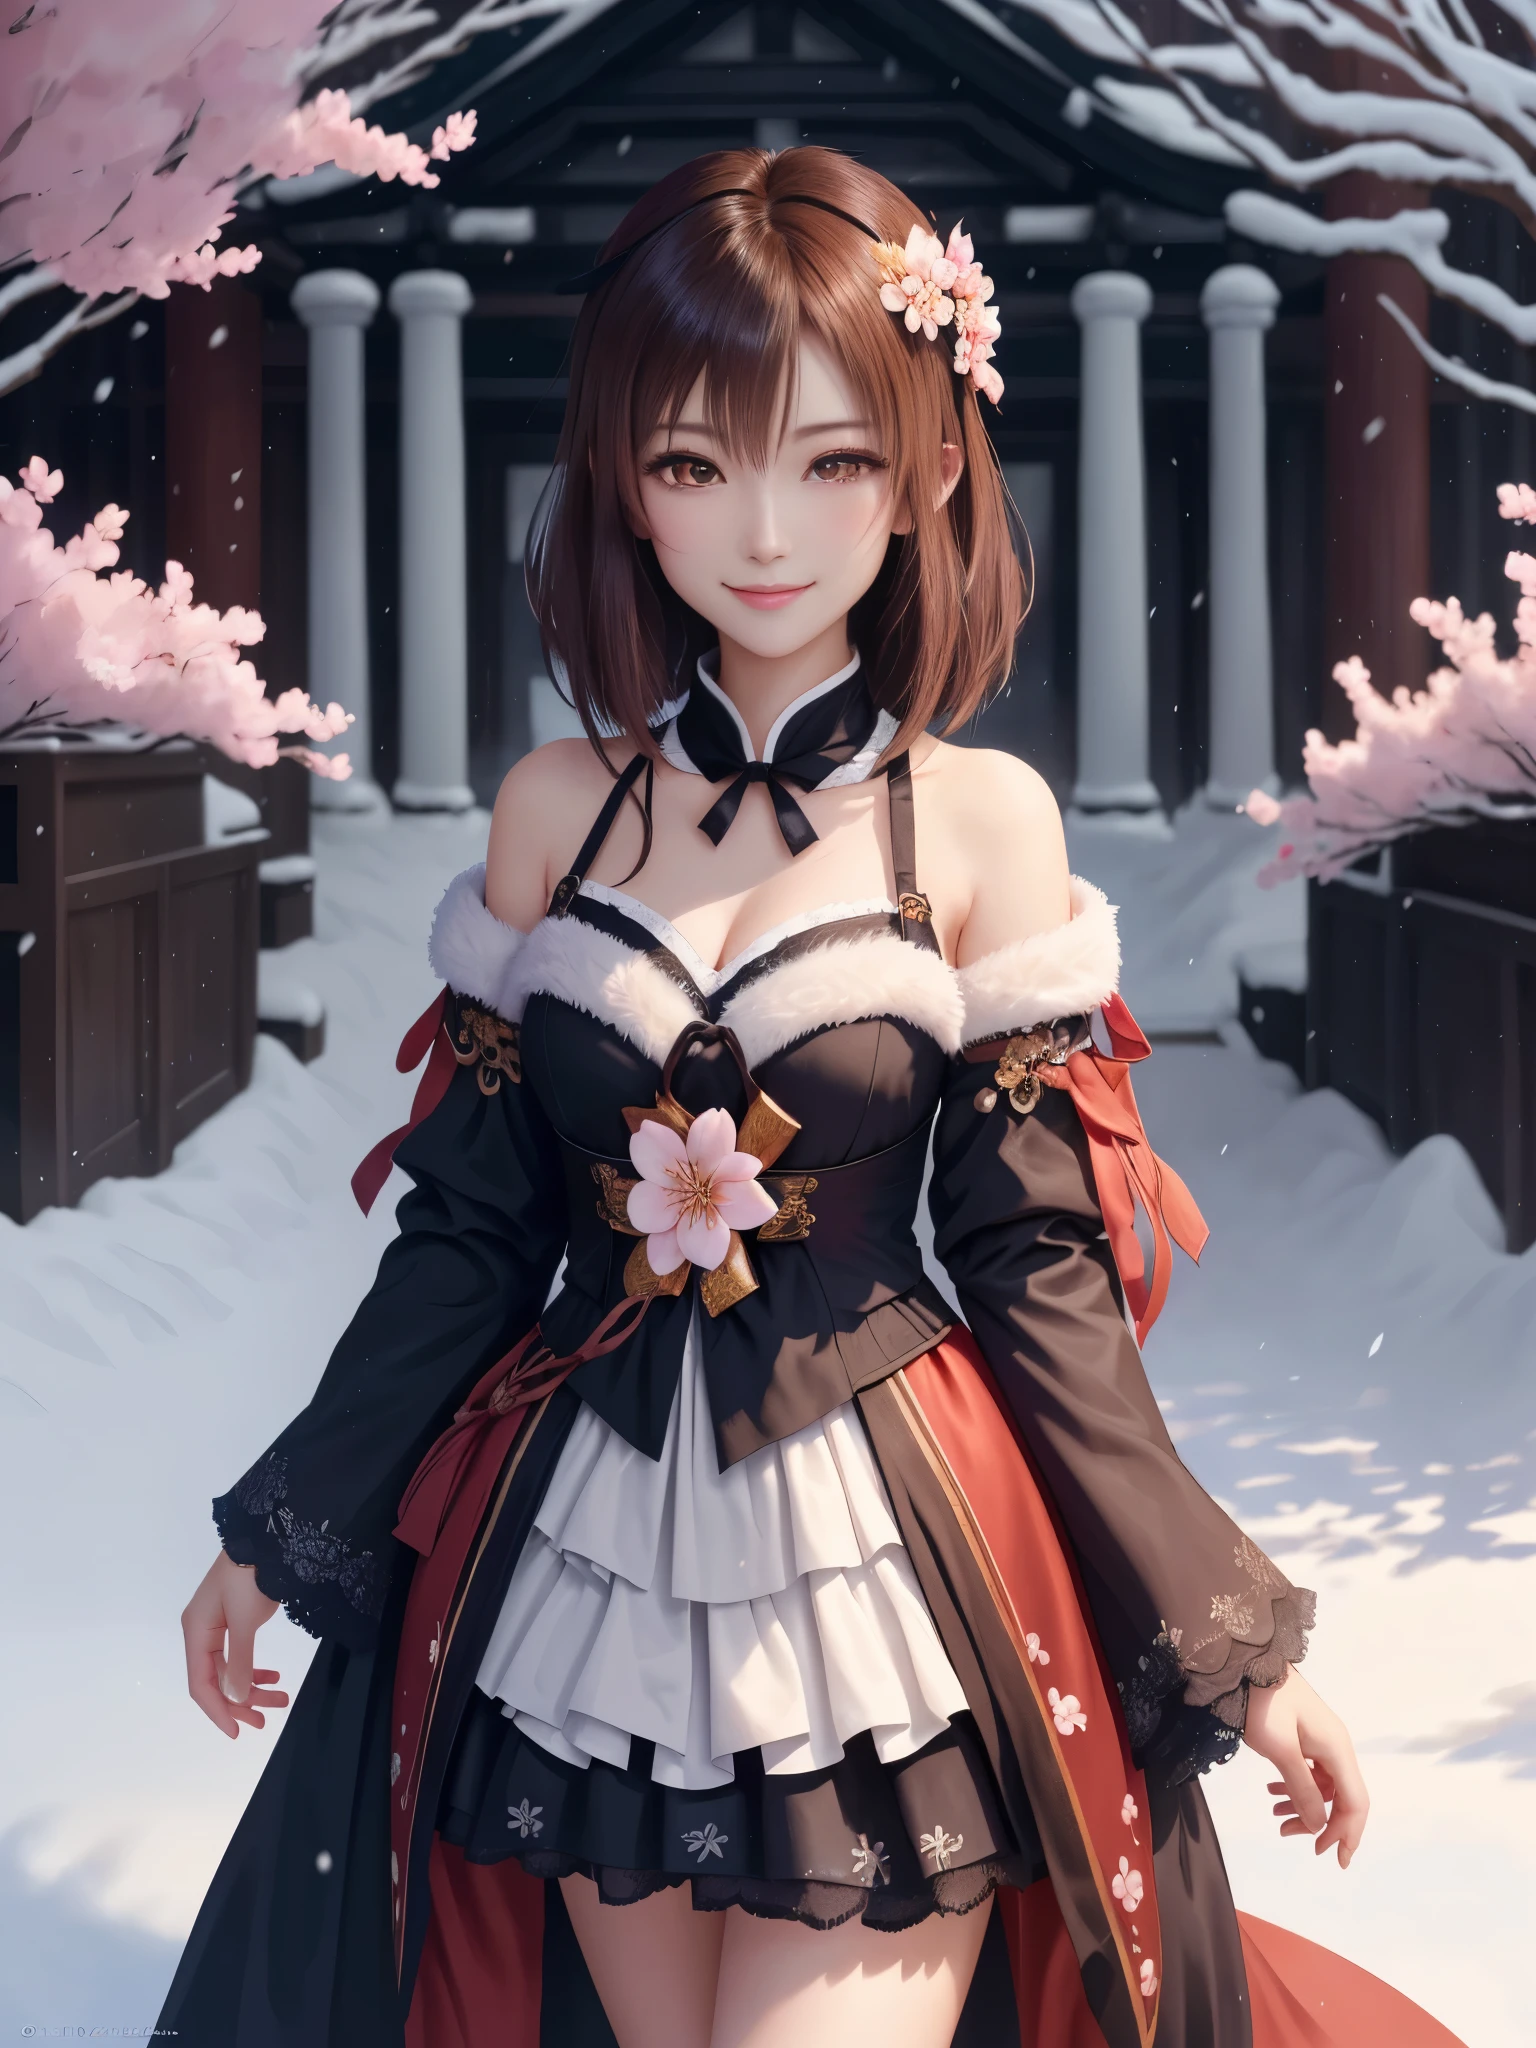 masterpiece , best quality,smile,smile,small face,the whole body is facing forward,shoulder exposure,cleavage exposure,bright brown hair,slender body shape,brown eyes,sharp contrast,short hair,Beautiful short hair,just one person,precision quality,Faithfully reproduced eyes, Cherry blossom background,snow scene,masterpiece, Fantastic cherry blossom background,night,Night background,cherry blossom background,beautiful details, colorful, delicate details, delicate lips, intricate details, genuine, ultrargenuineista, Girl with multicolored haired fox sitting on a branch:Mature, bright eyes, ,Colorful Fox, raposa de nine tails, Three tails Fox, Three tails Fox, onmyoji detail art, beautiful fine art illustration, mythical creatures, Fox, beautiful digital art,shrine maiden,hold hands,exquisite digital illustration, mizutsune, Inspired by mythical wild web creatures, pixiv in digital art, shining light, high contrast, Mysterious,